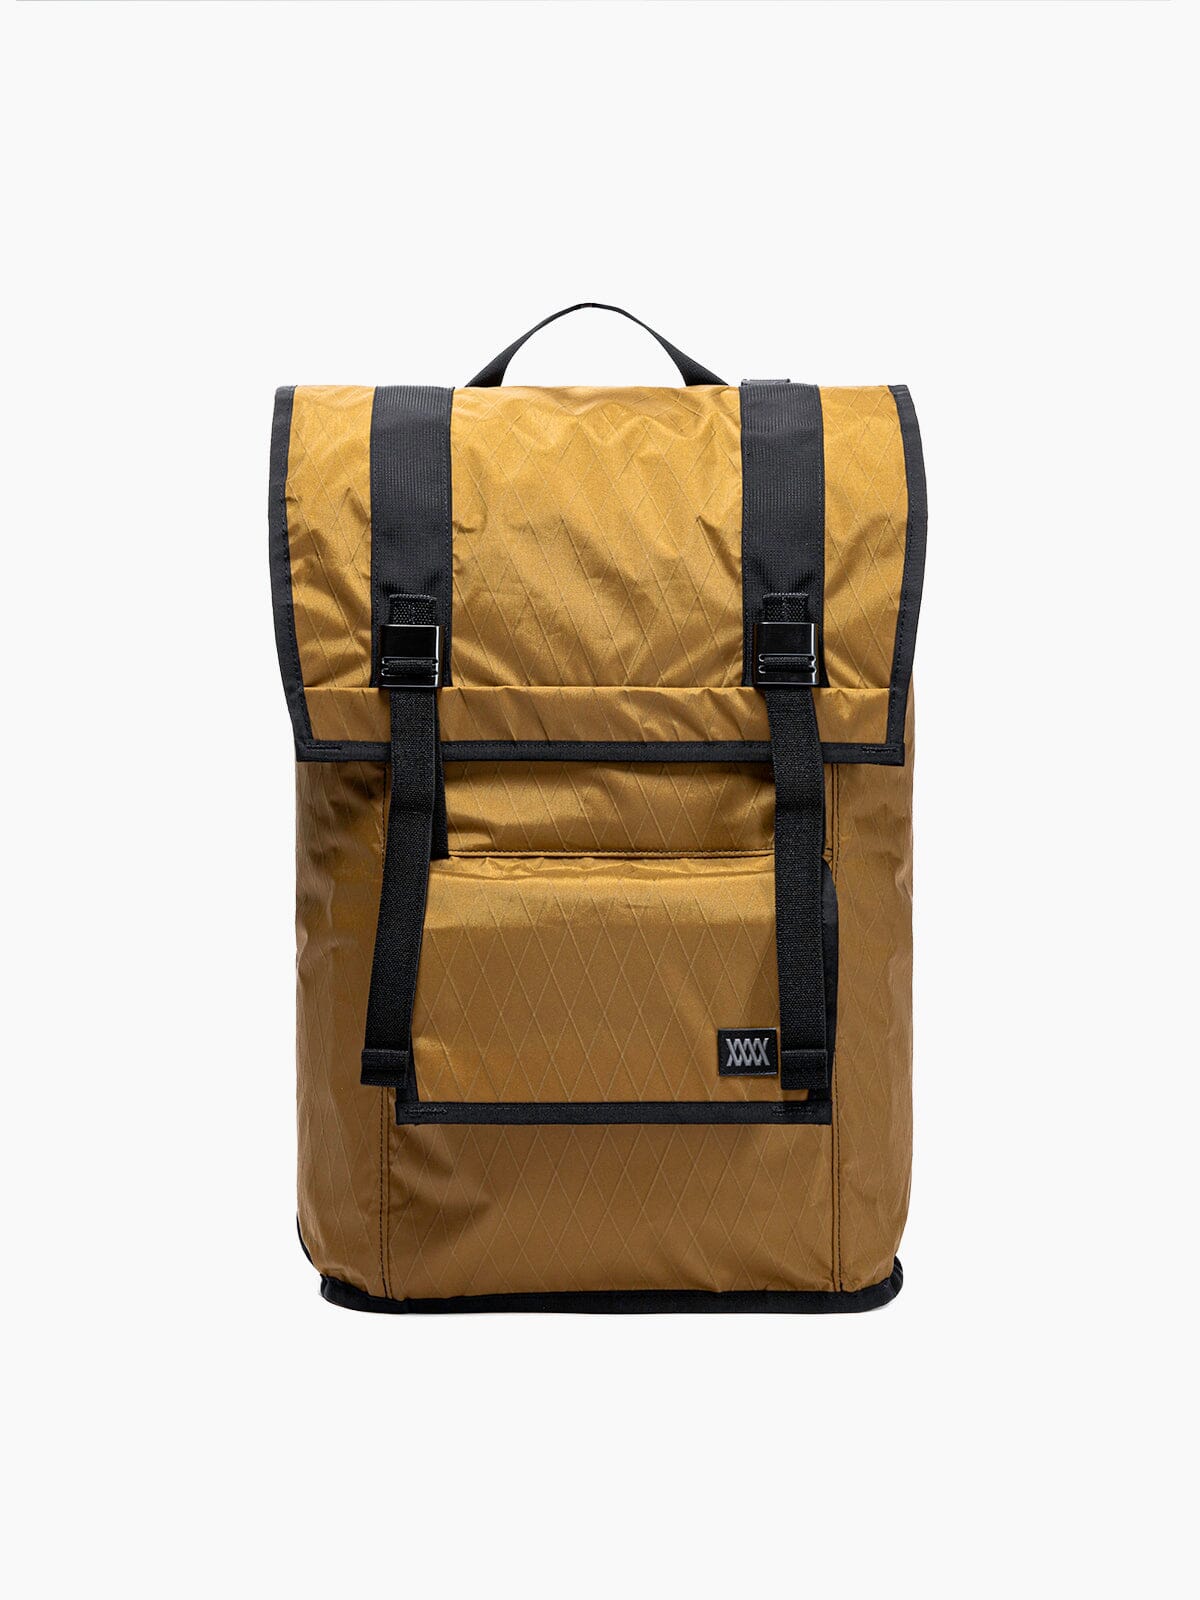 Fitzroy : AP by Mission Workshop - Weatherproof Bags & Technical Apparel - San Francisco & Los Angeles - Built to endure - Guaranteed forever